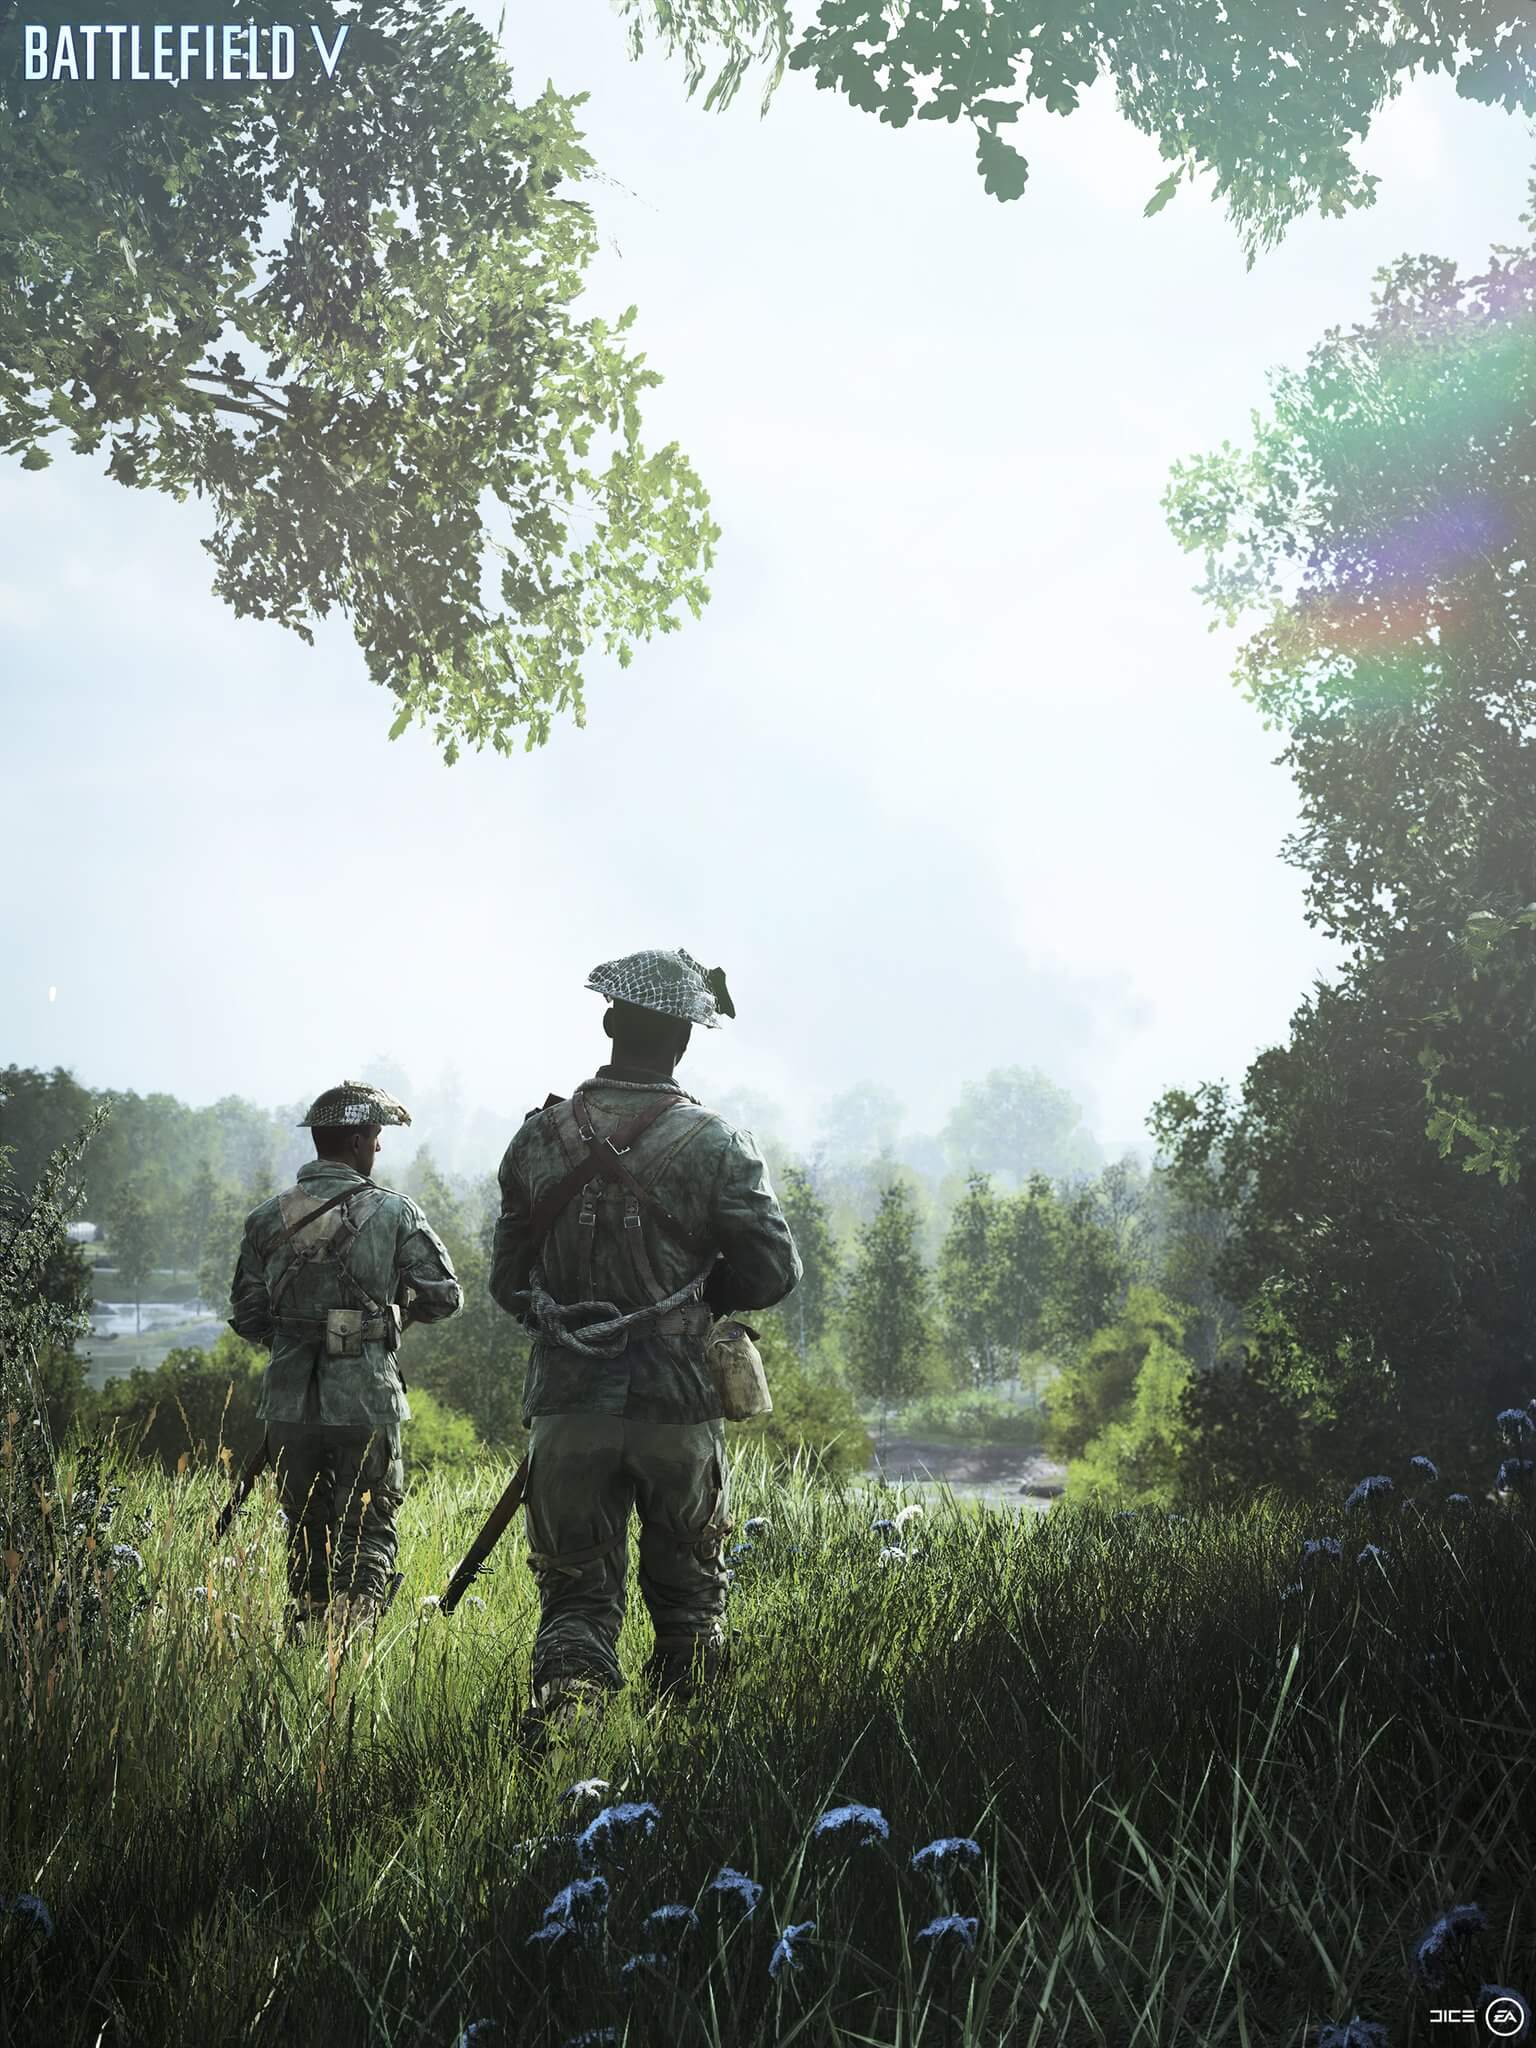 Battlefield 5 Update 7.3 releases tomorrow and here are its full patch notes